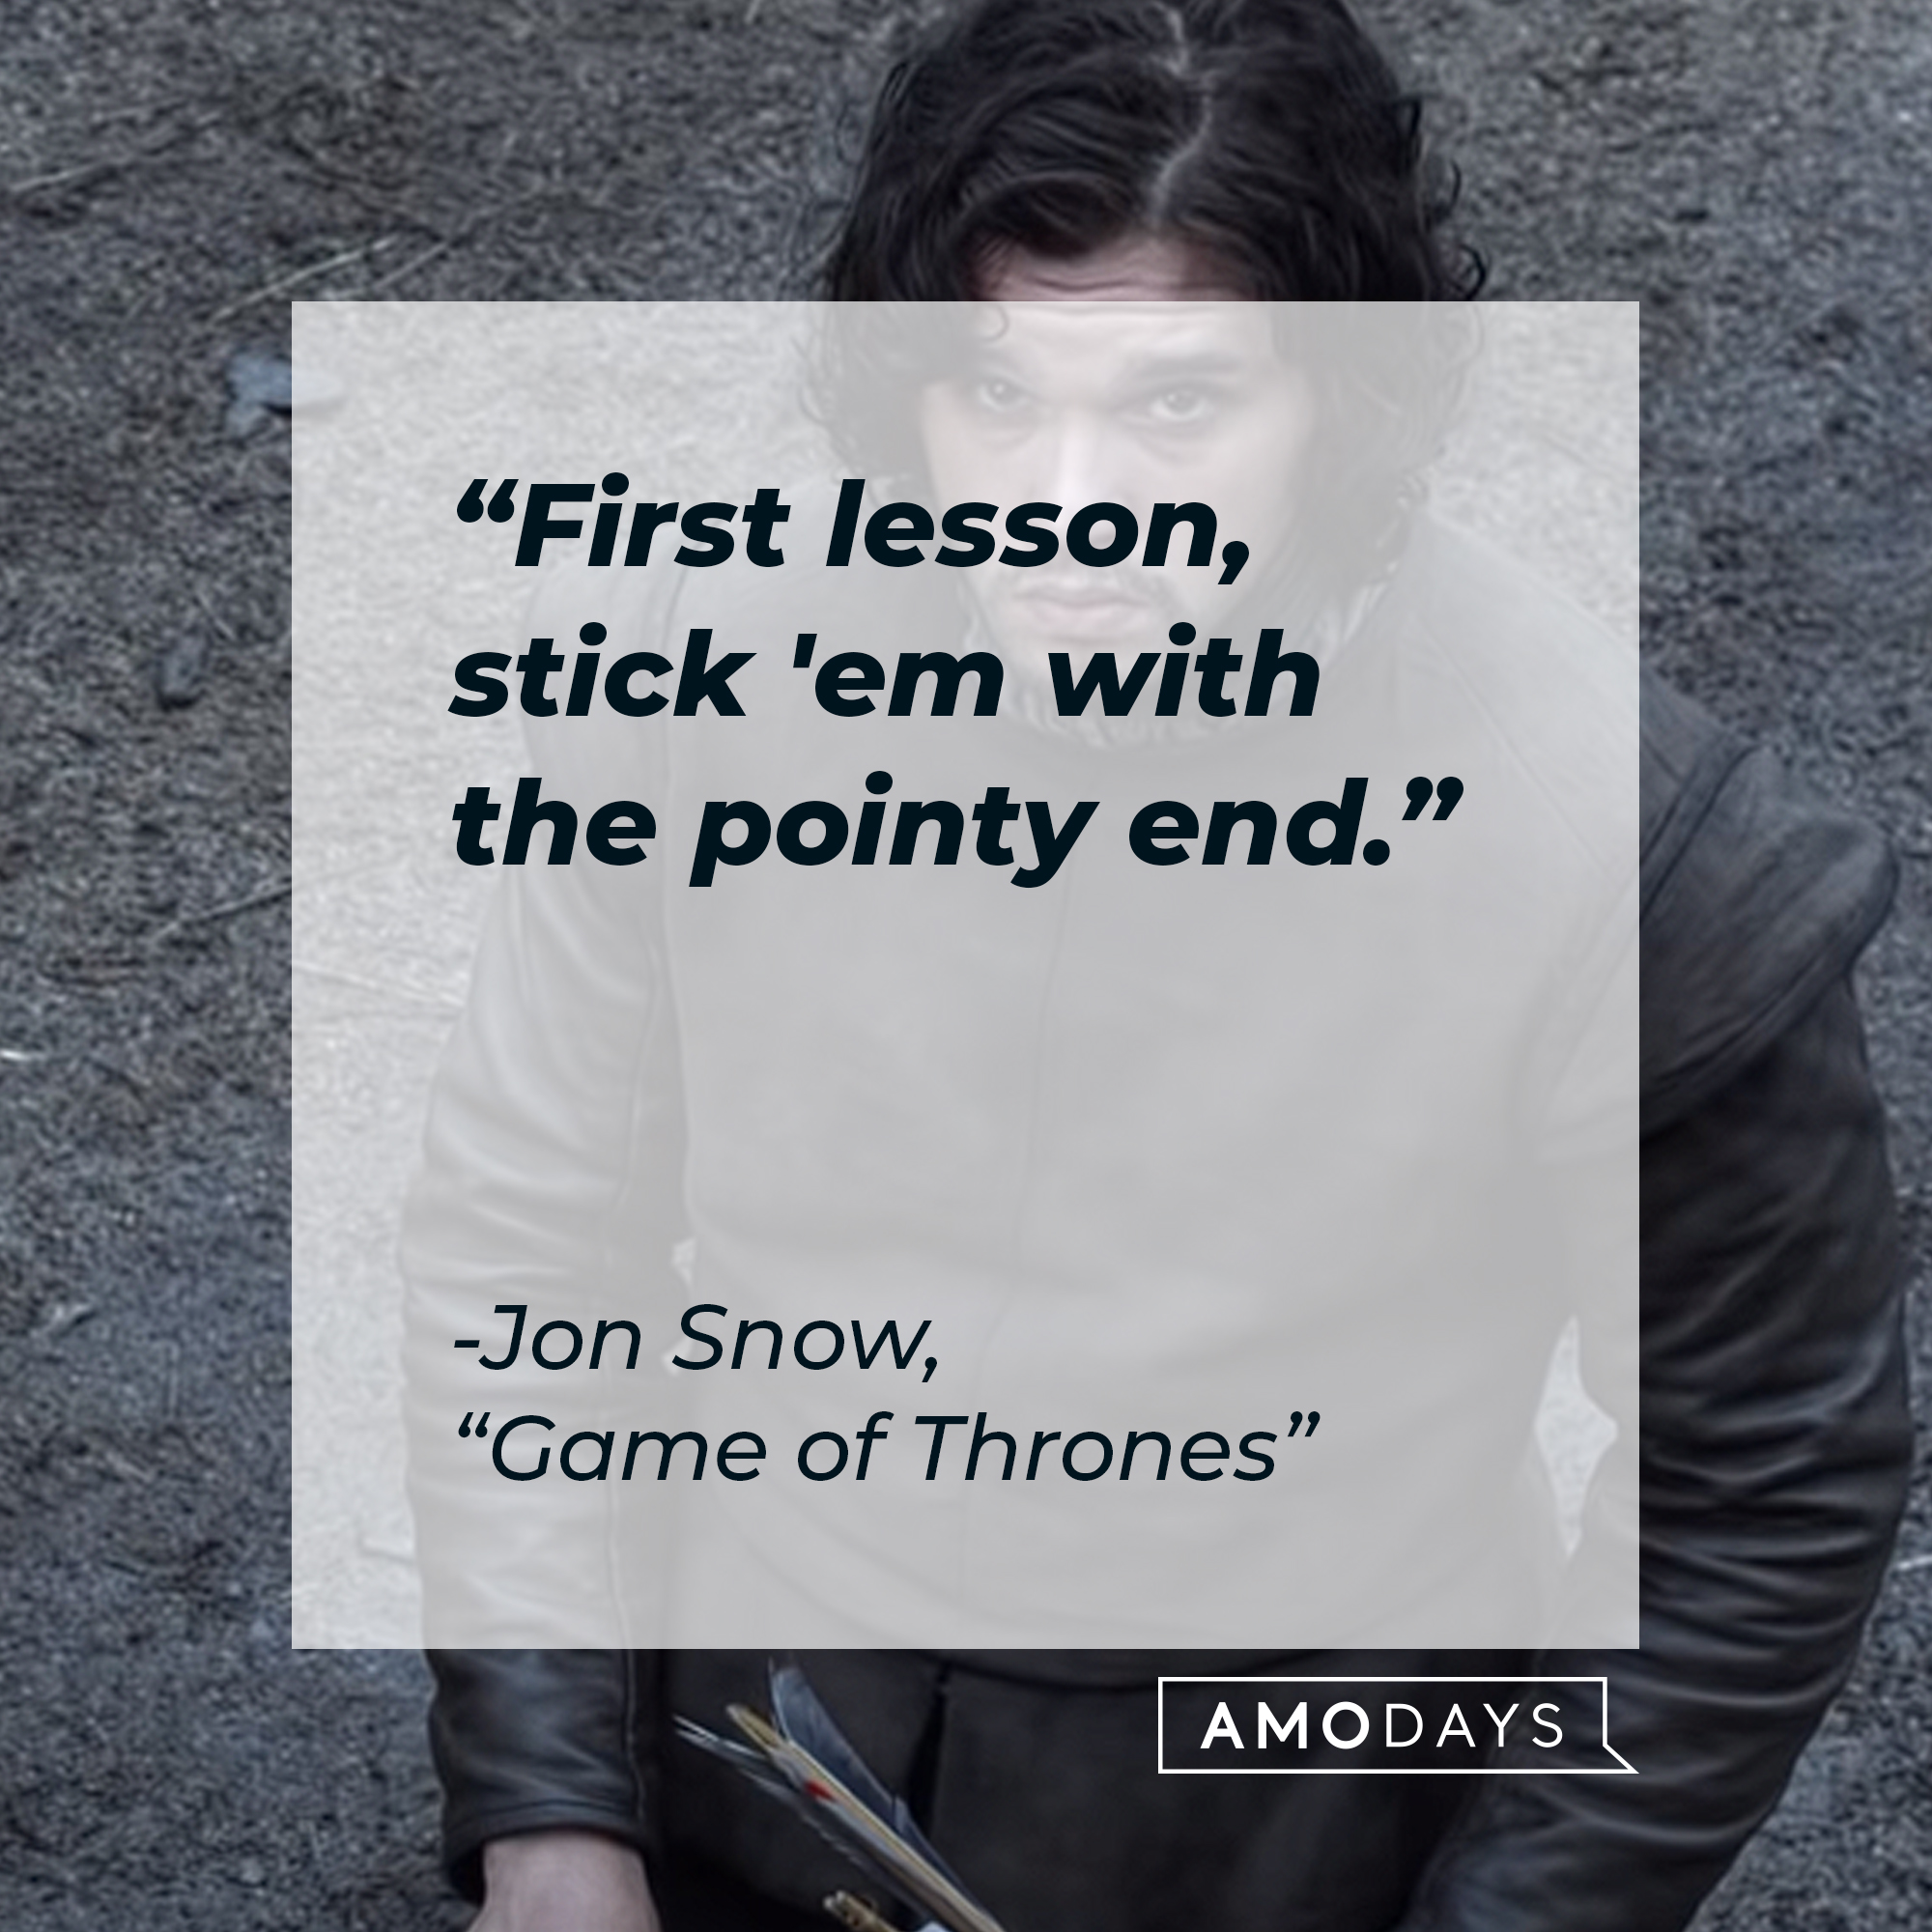 A photo of Jone Snow with the quote, "First lesson, stick 'em with the pointy end." | Source YouTube/gameofthrones